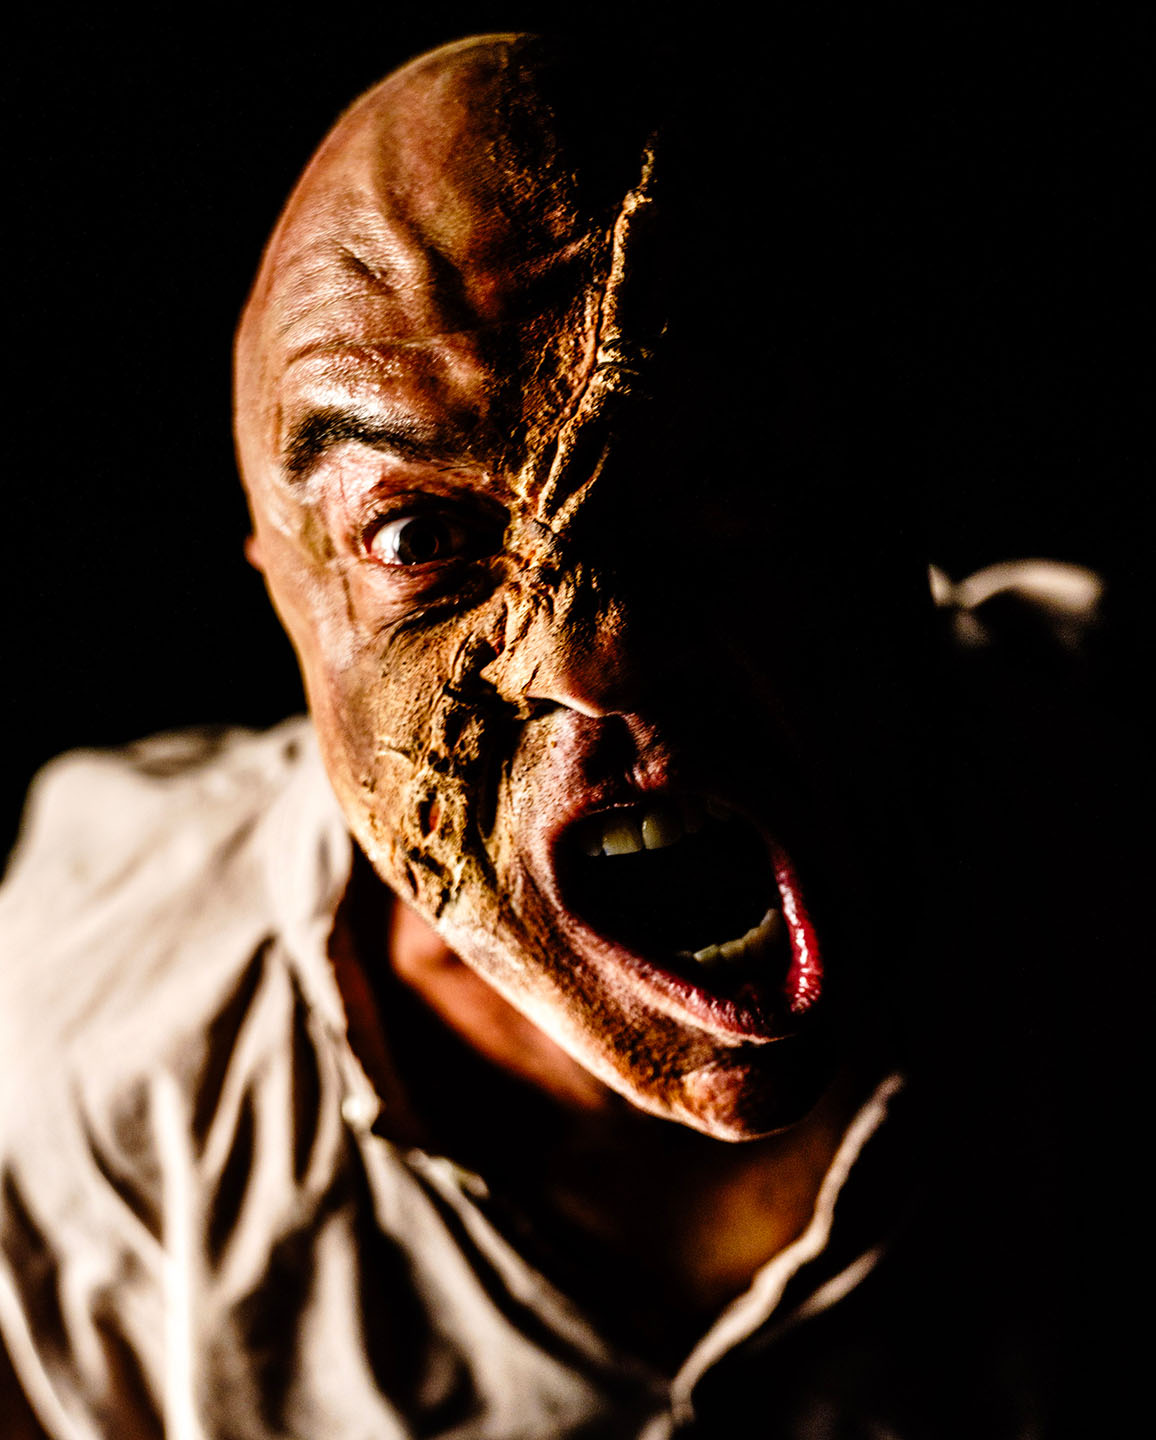 (L-R) Paul J. Potenza in Jobsite's Frankenstein. (Photo: Stage Photography of Tampa)